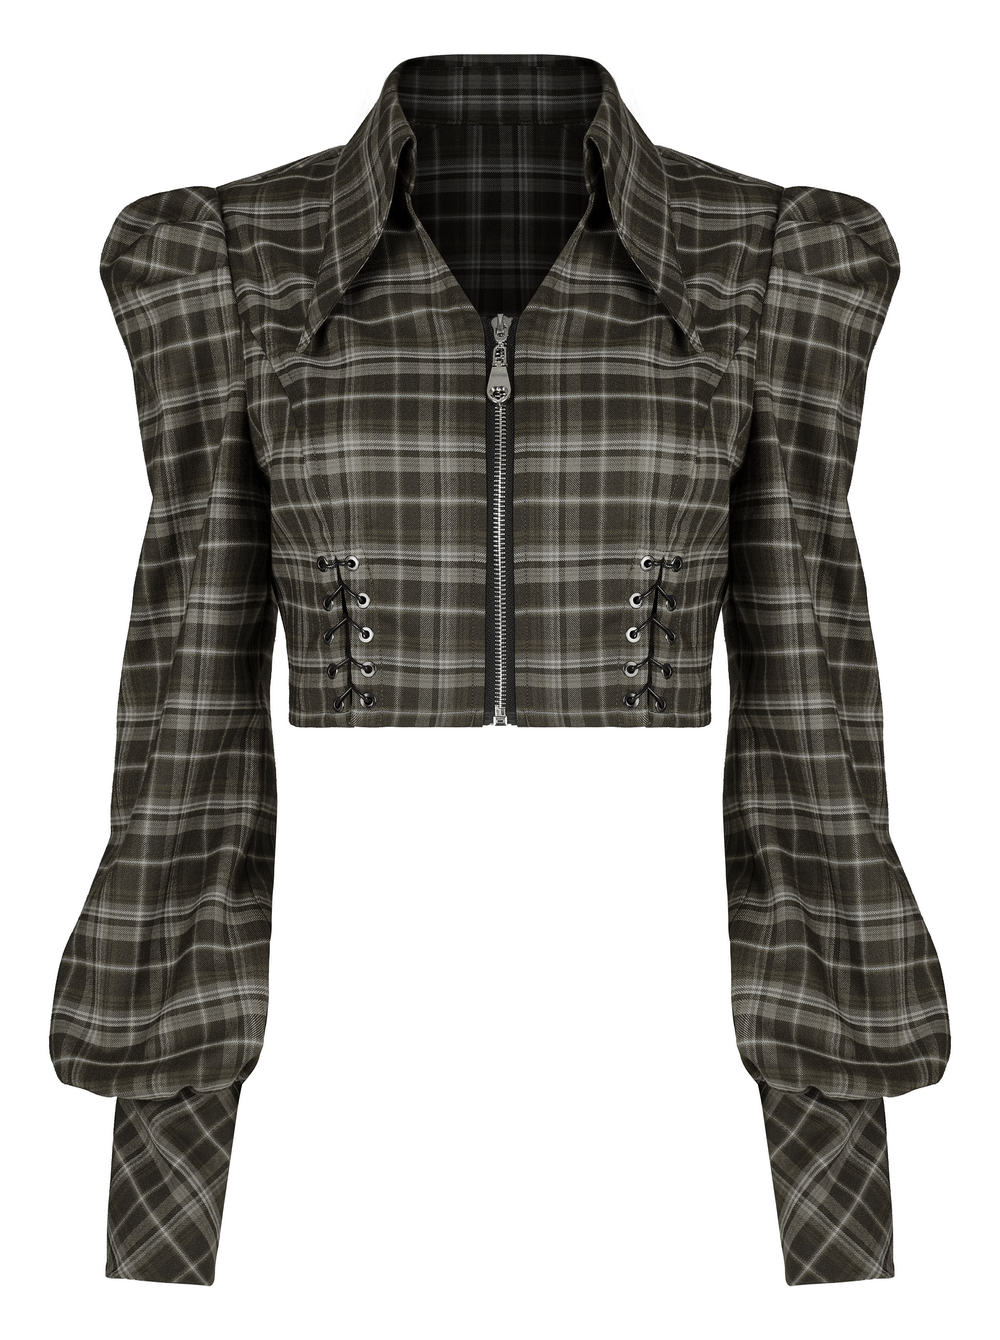 Edgy Plaid Zip Crop Top with Long Bubble Sleeves